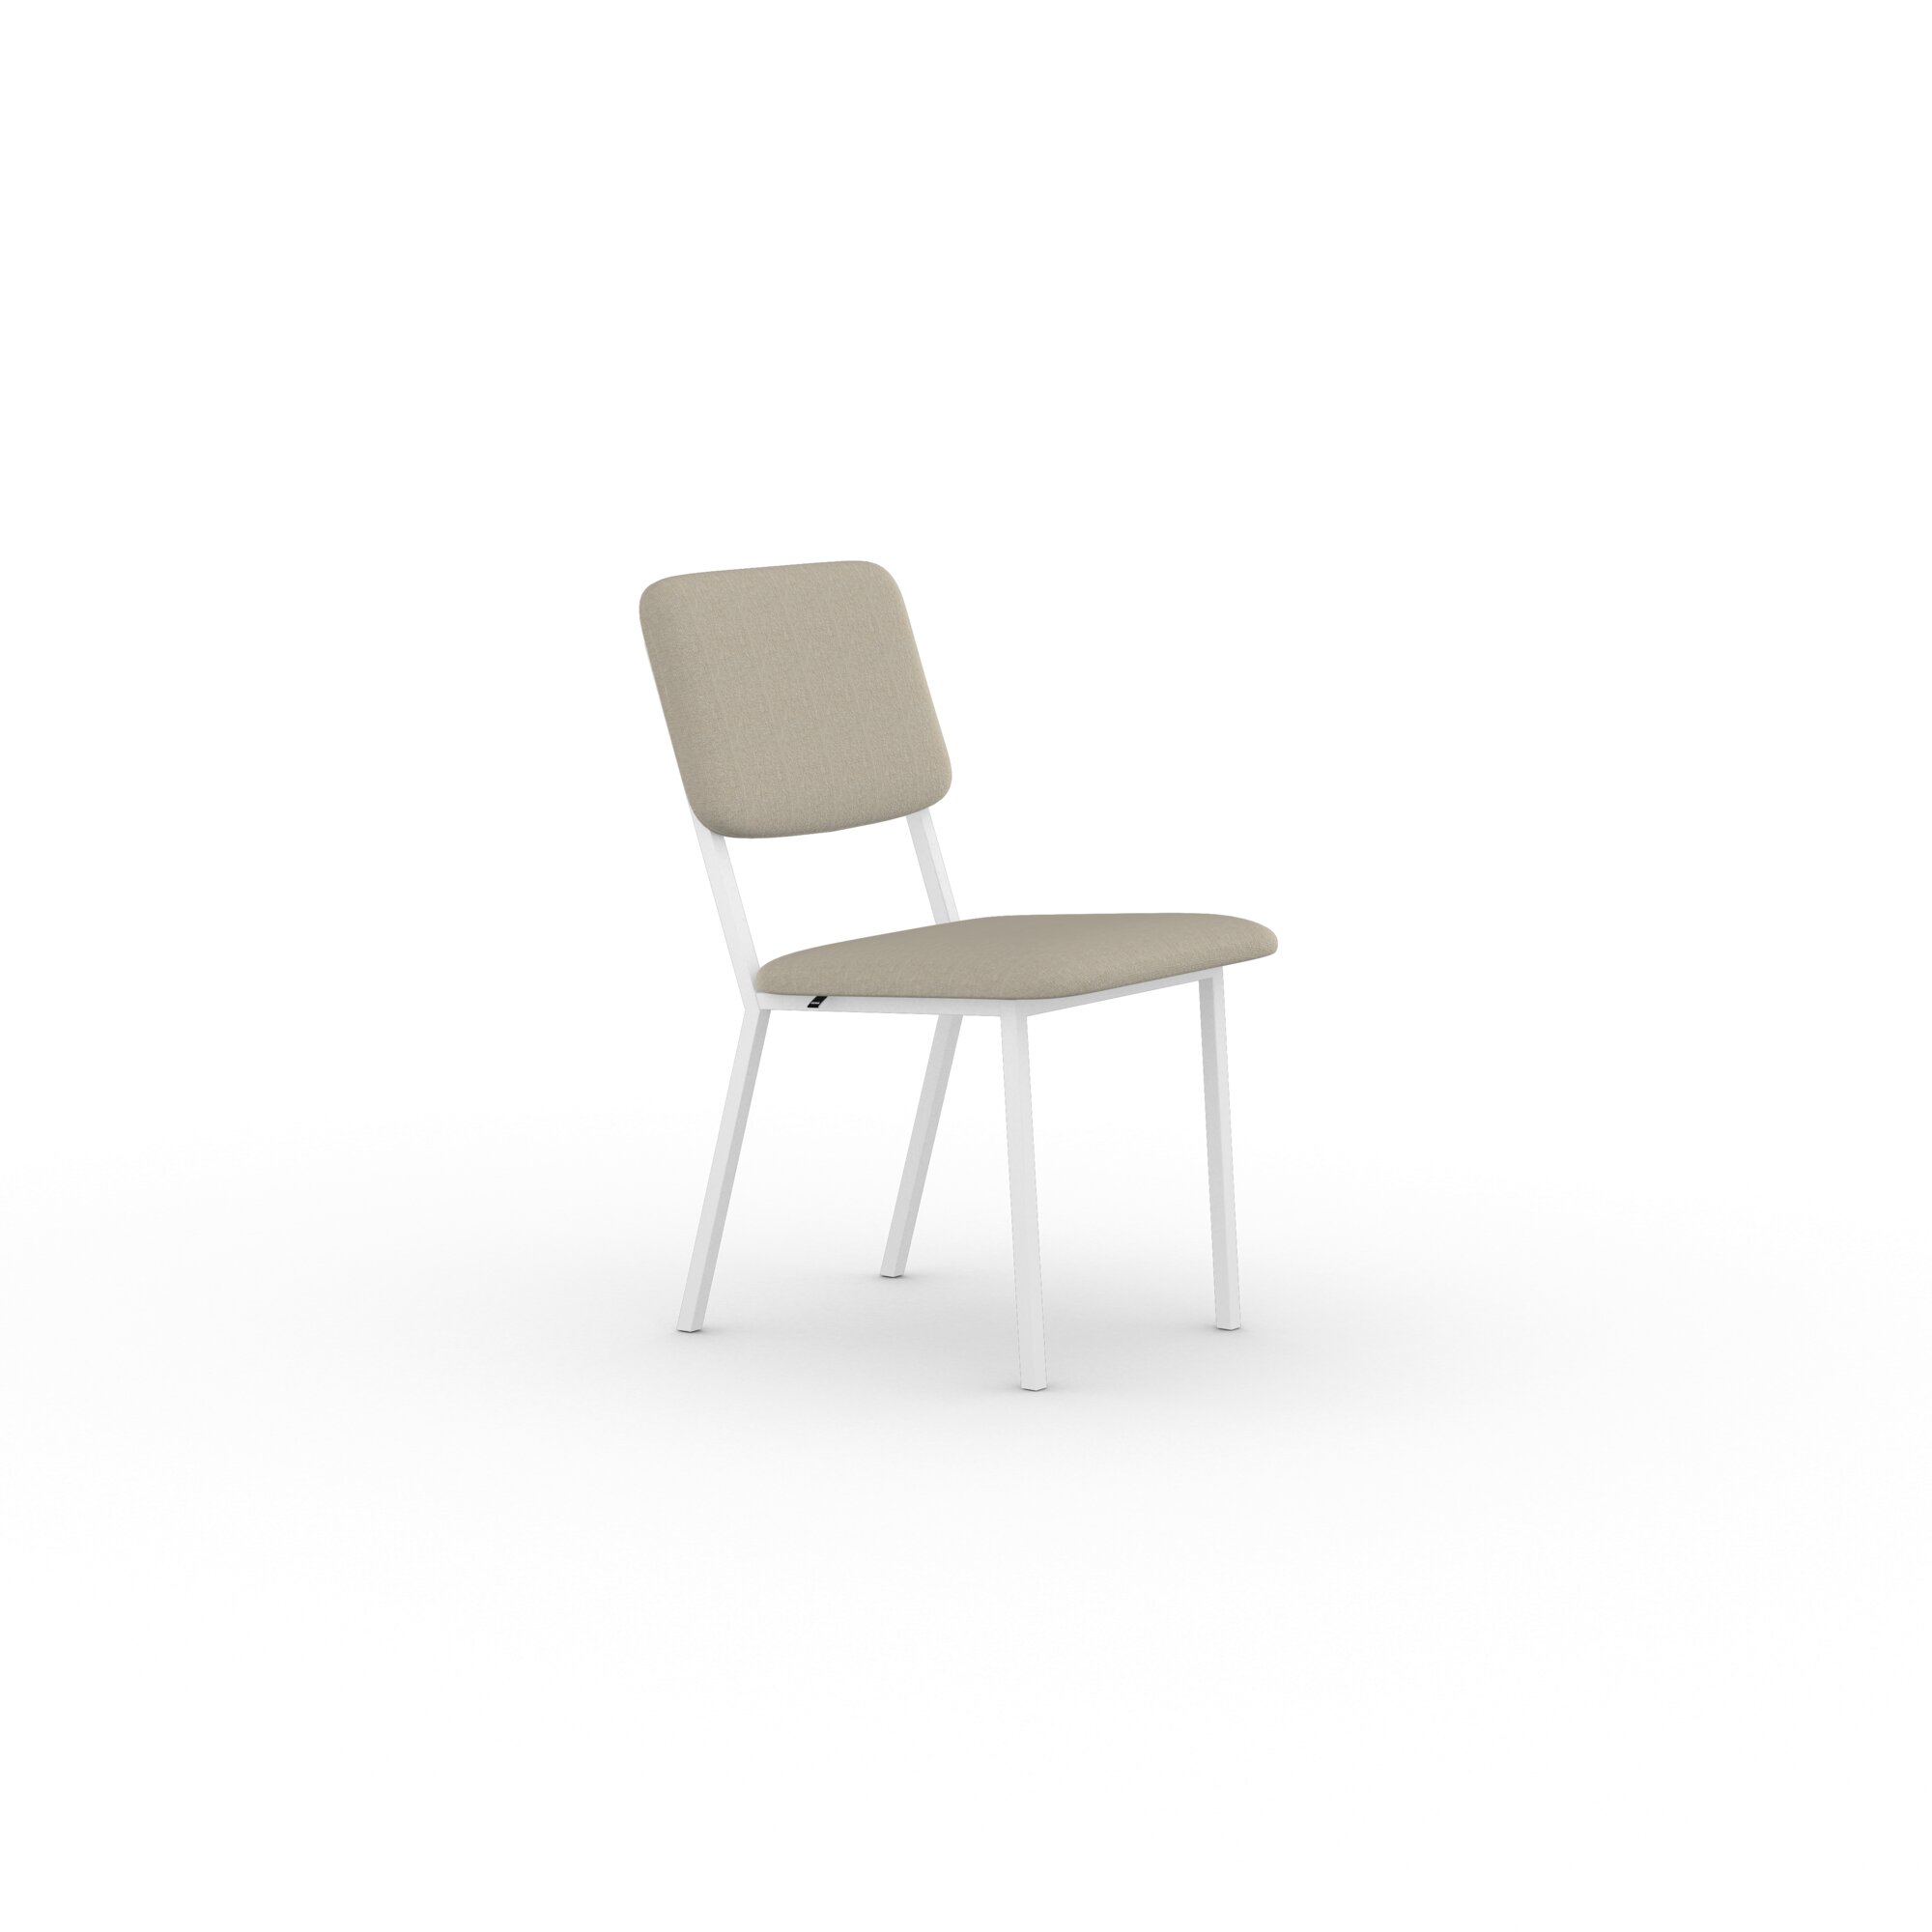 Design modern dining chair | Co Chair without armrest Beige soil natural01 | Studio HENK| 